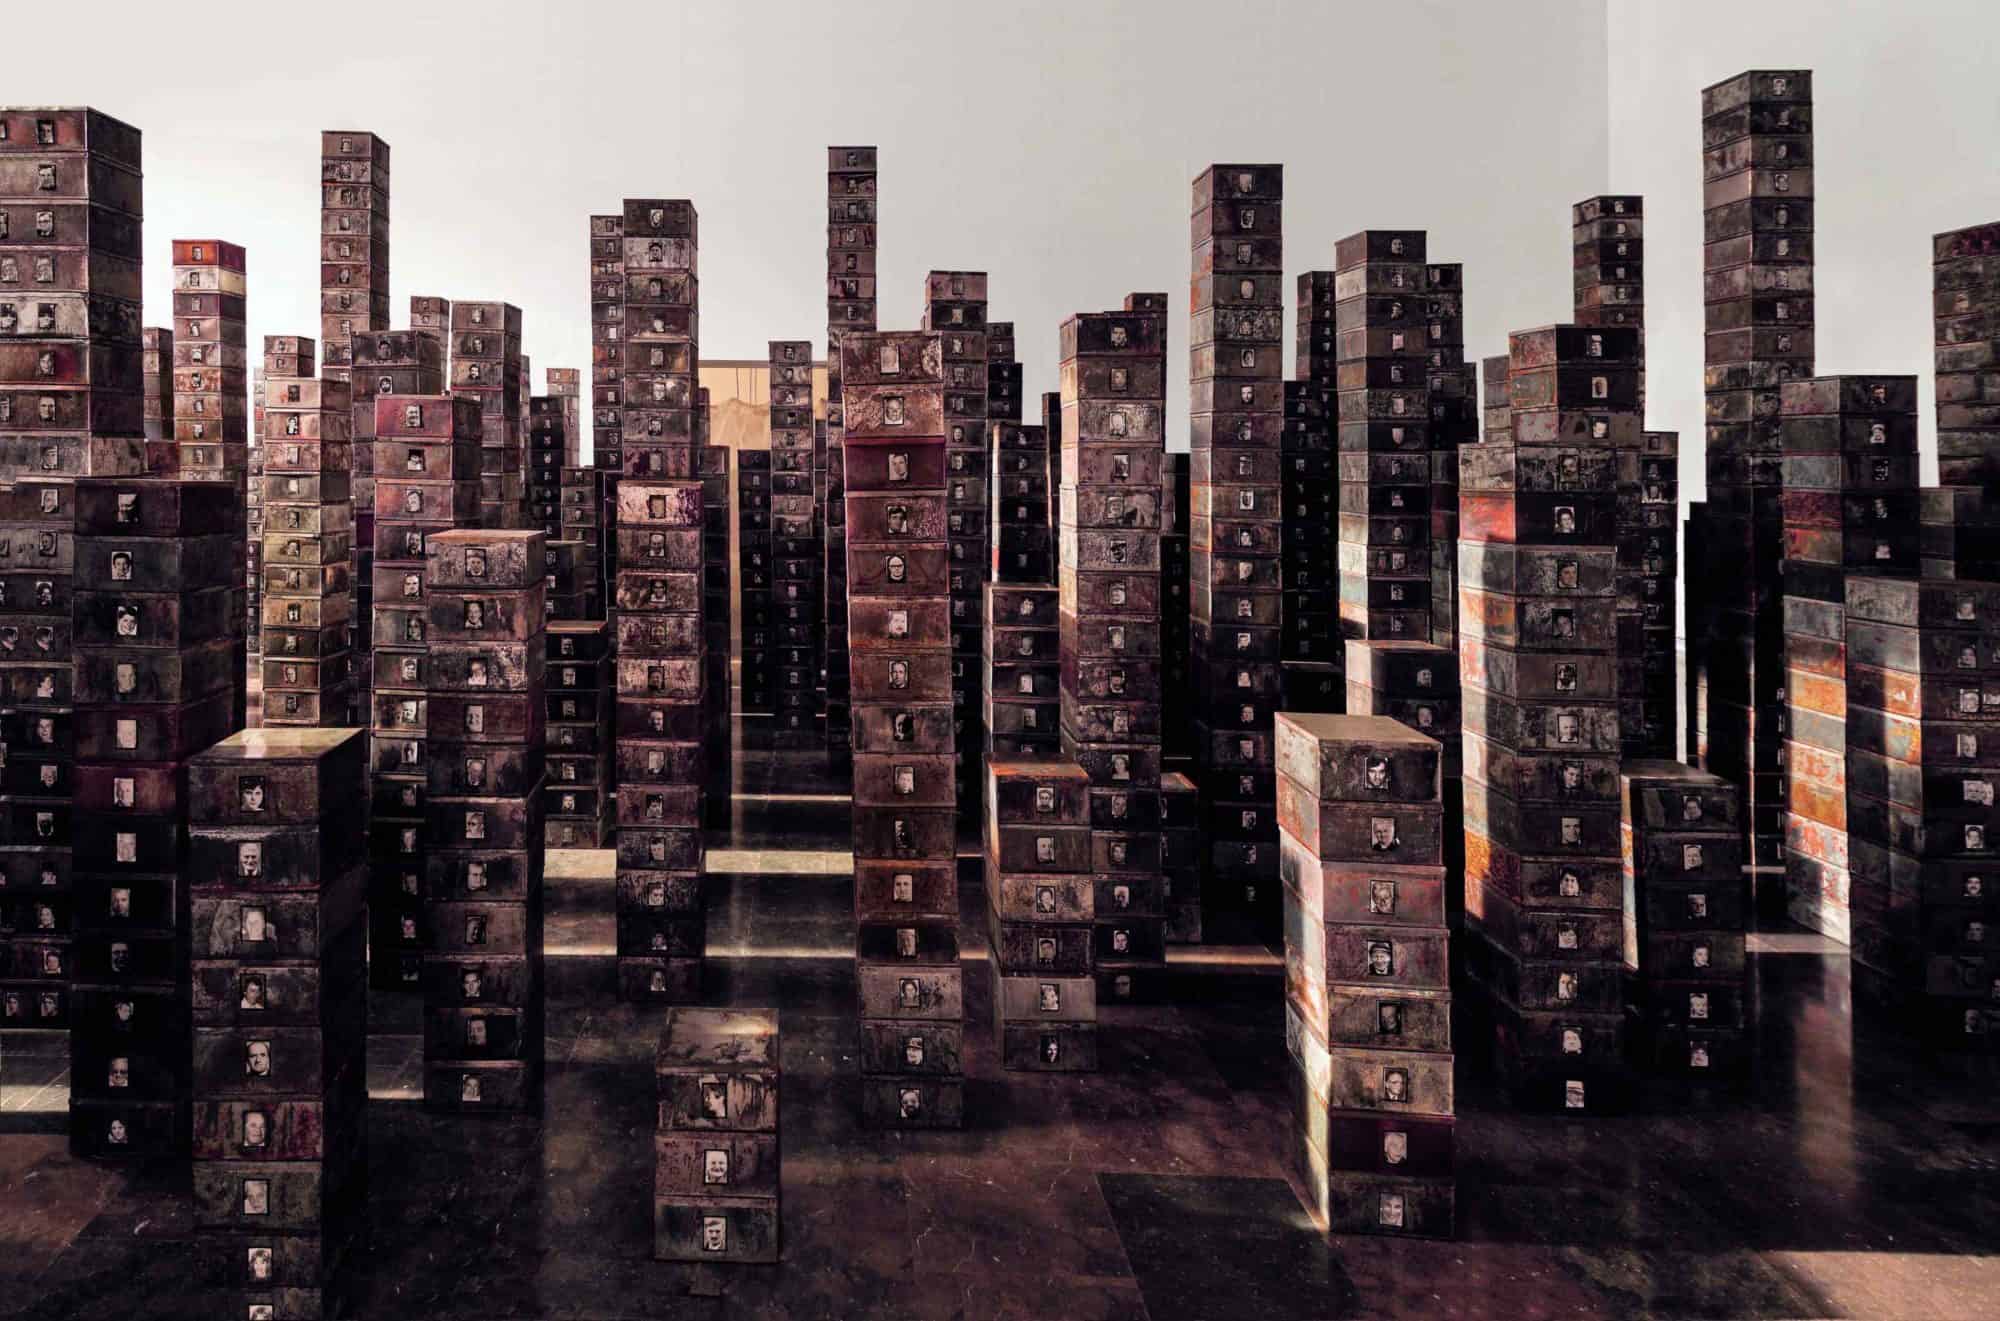 Towers of filing cabinets as part of Christian Boltanski's latest exhibition in Paris.